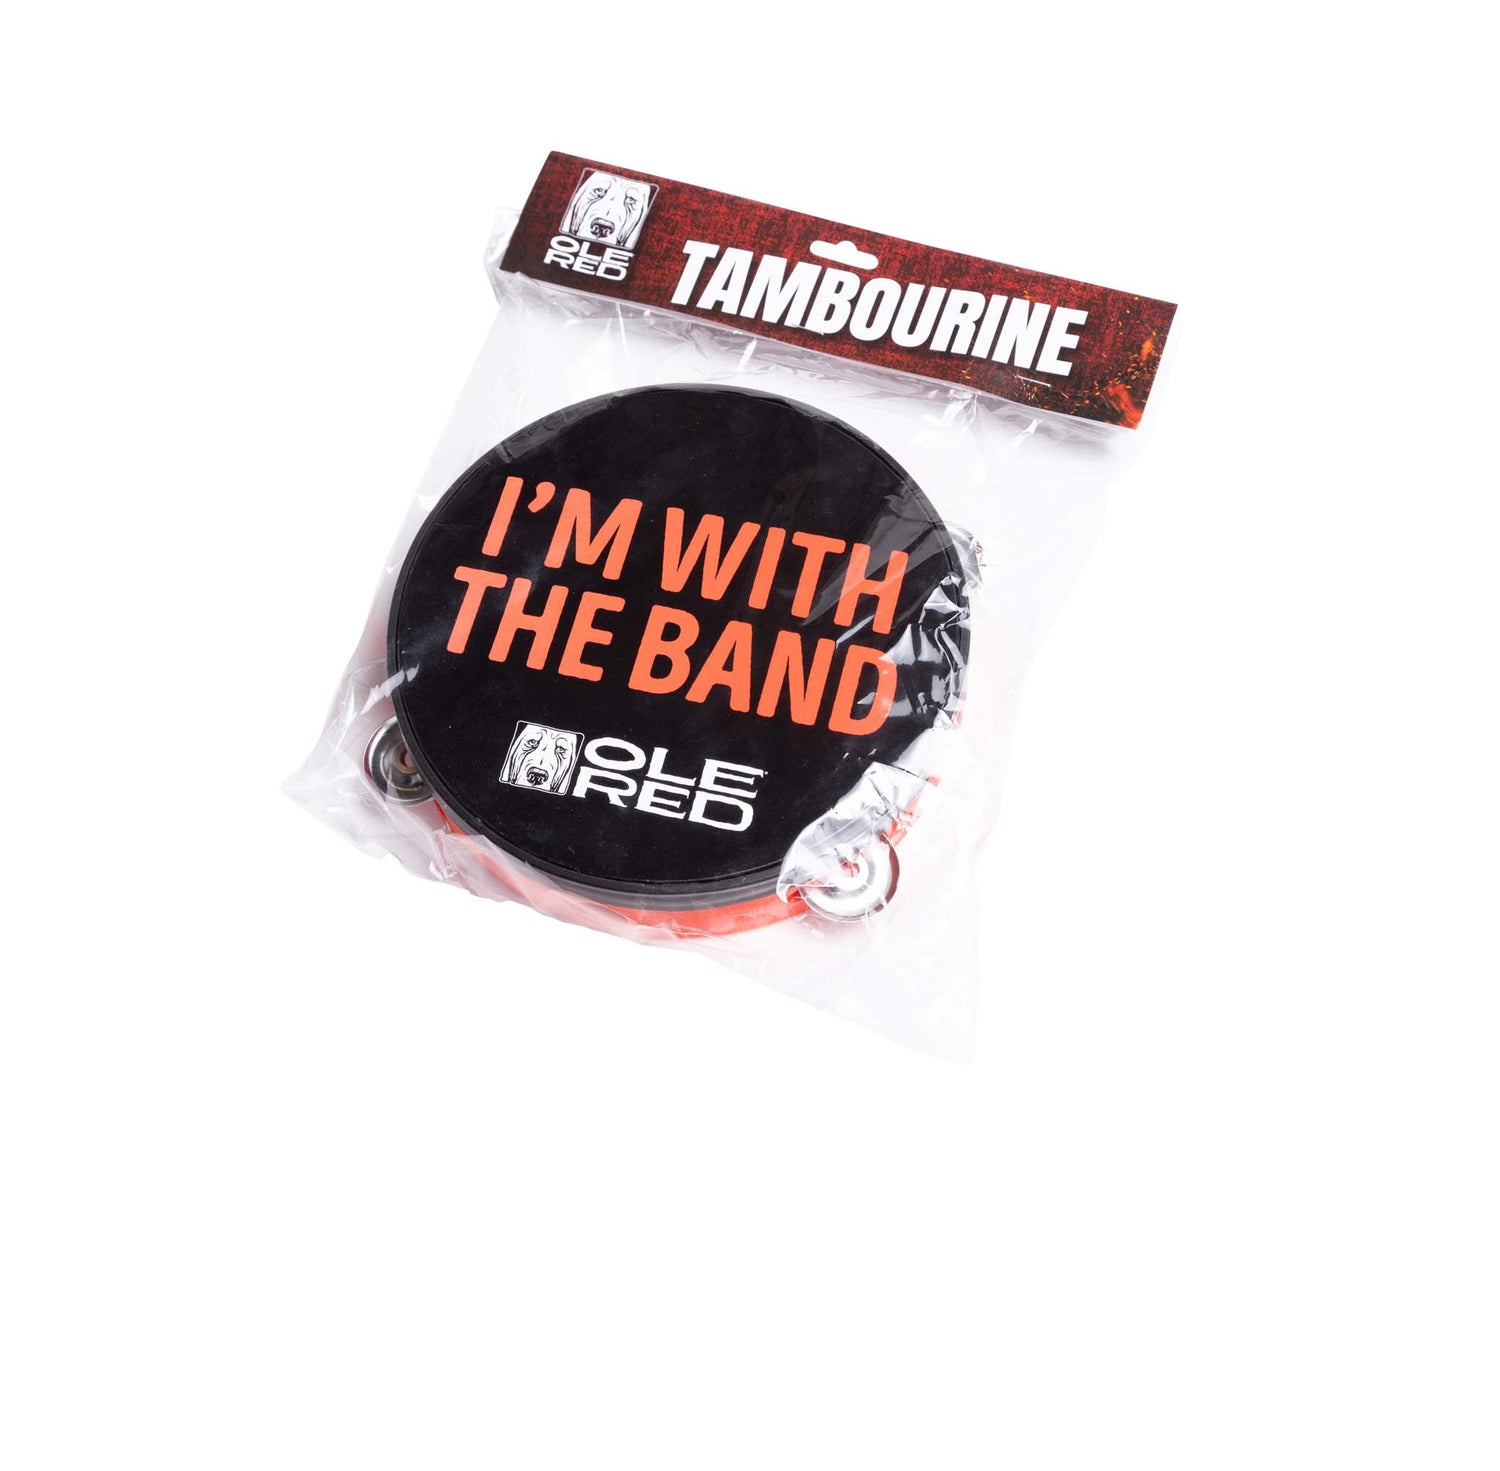 Ole Red I'm With the Band Tambourine